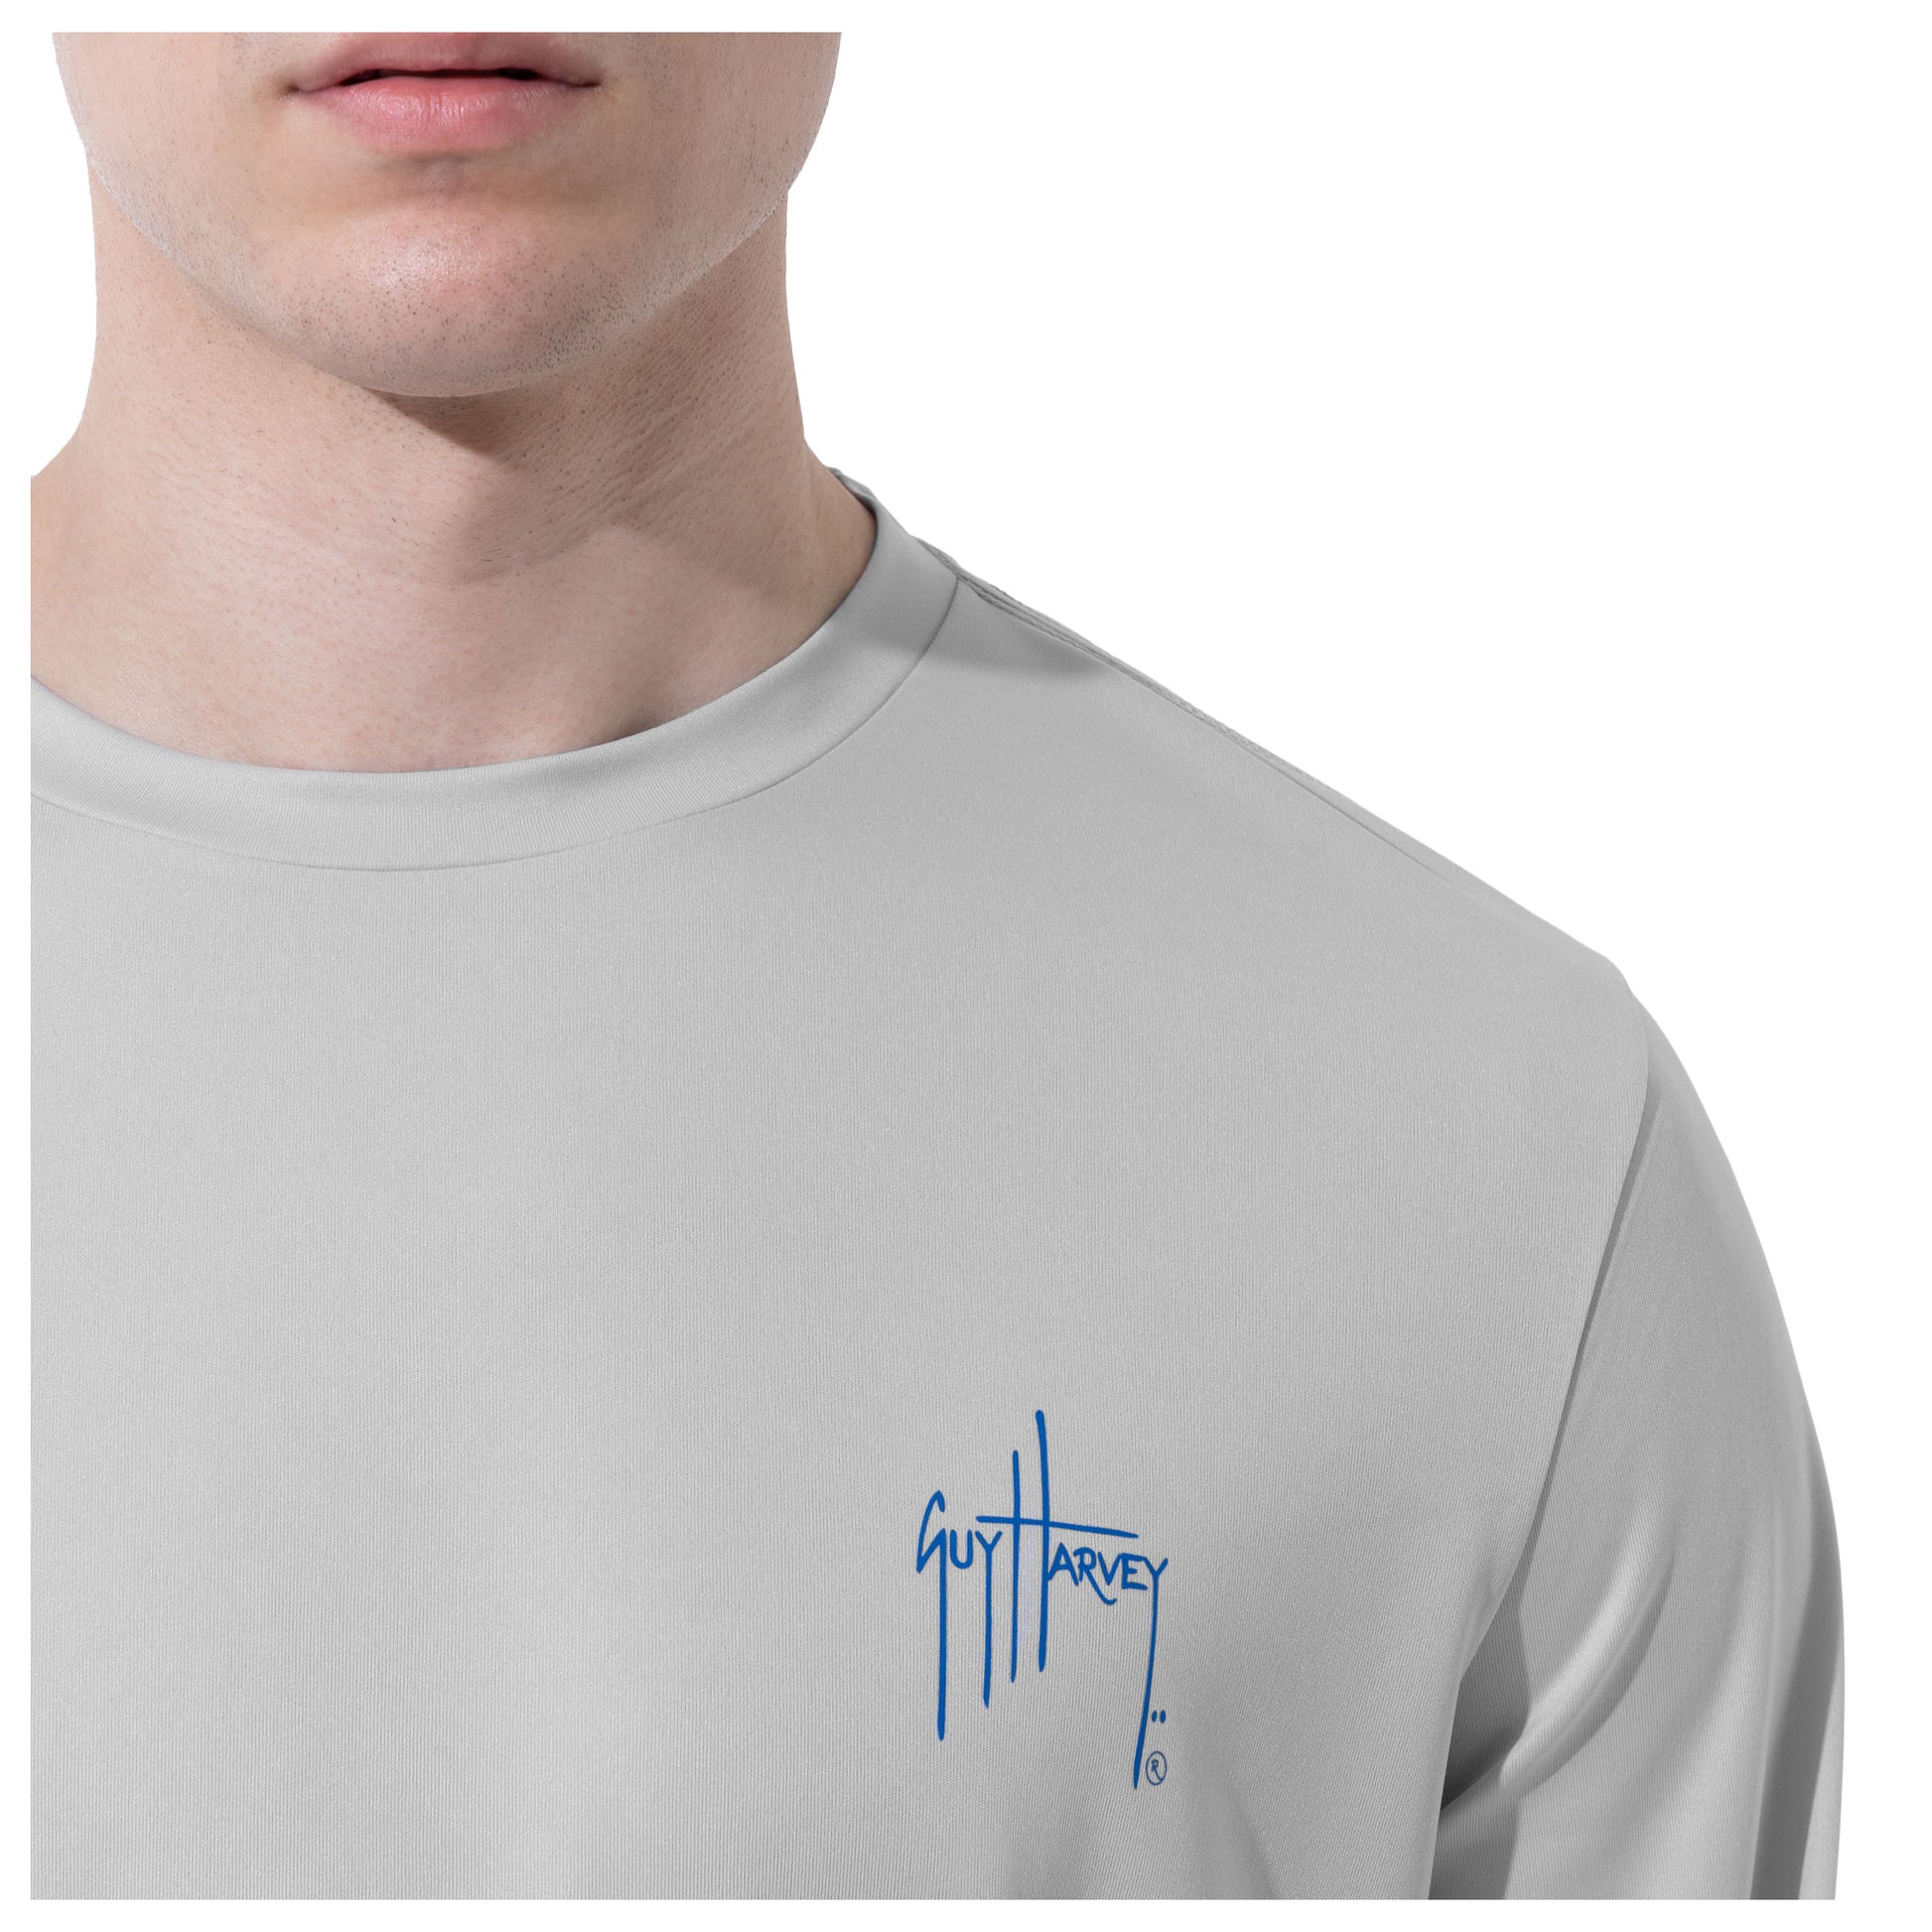 Men Long Sleeve Performance Fishing Sun Protection with UPF 50 Plus. Color Grey Guy Harvey Signature on the Chest